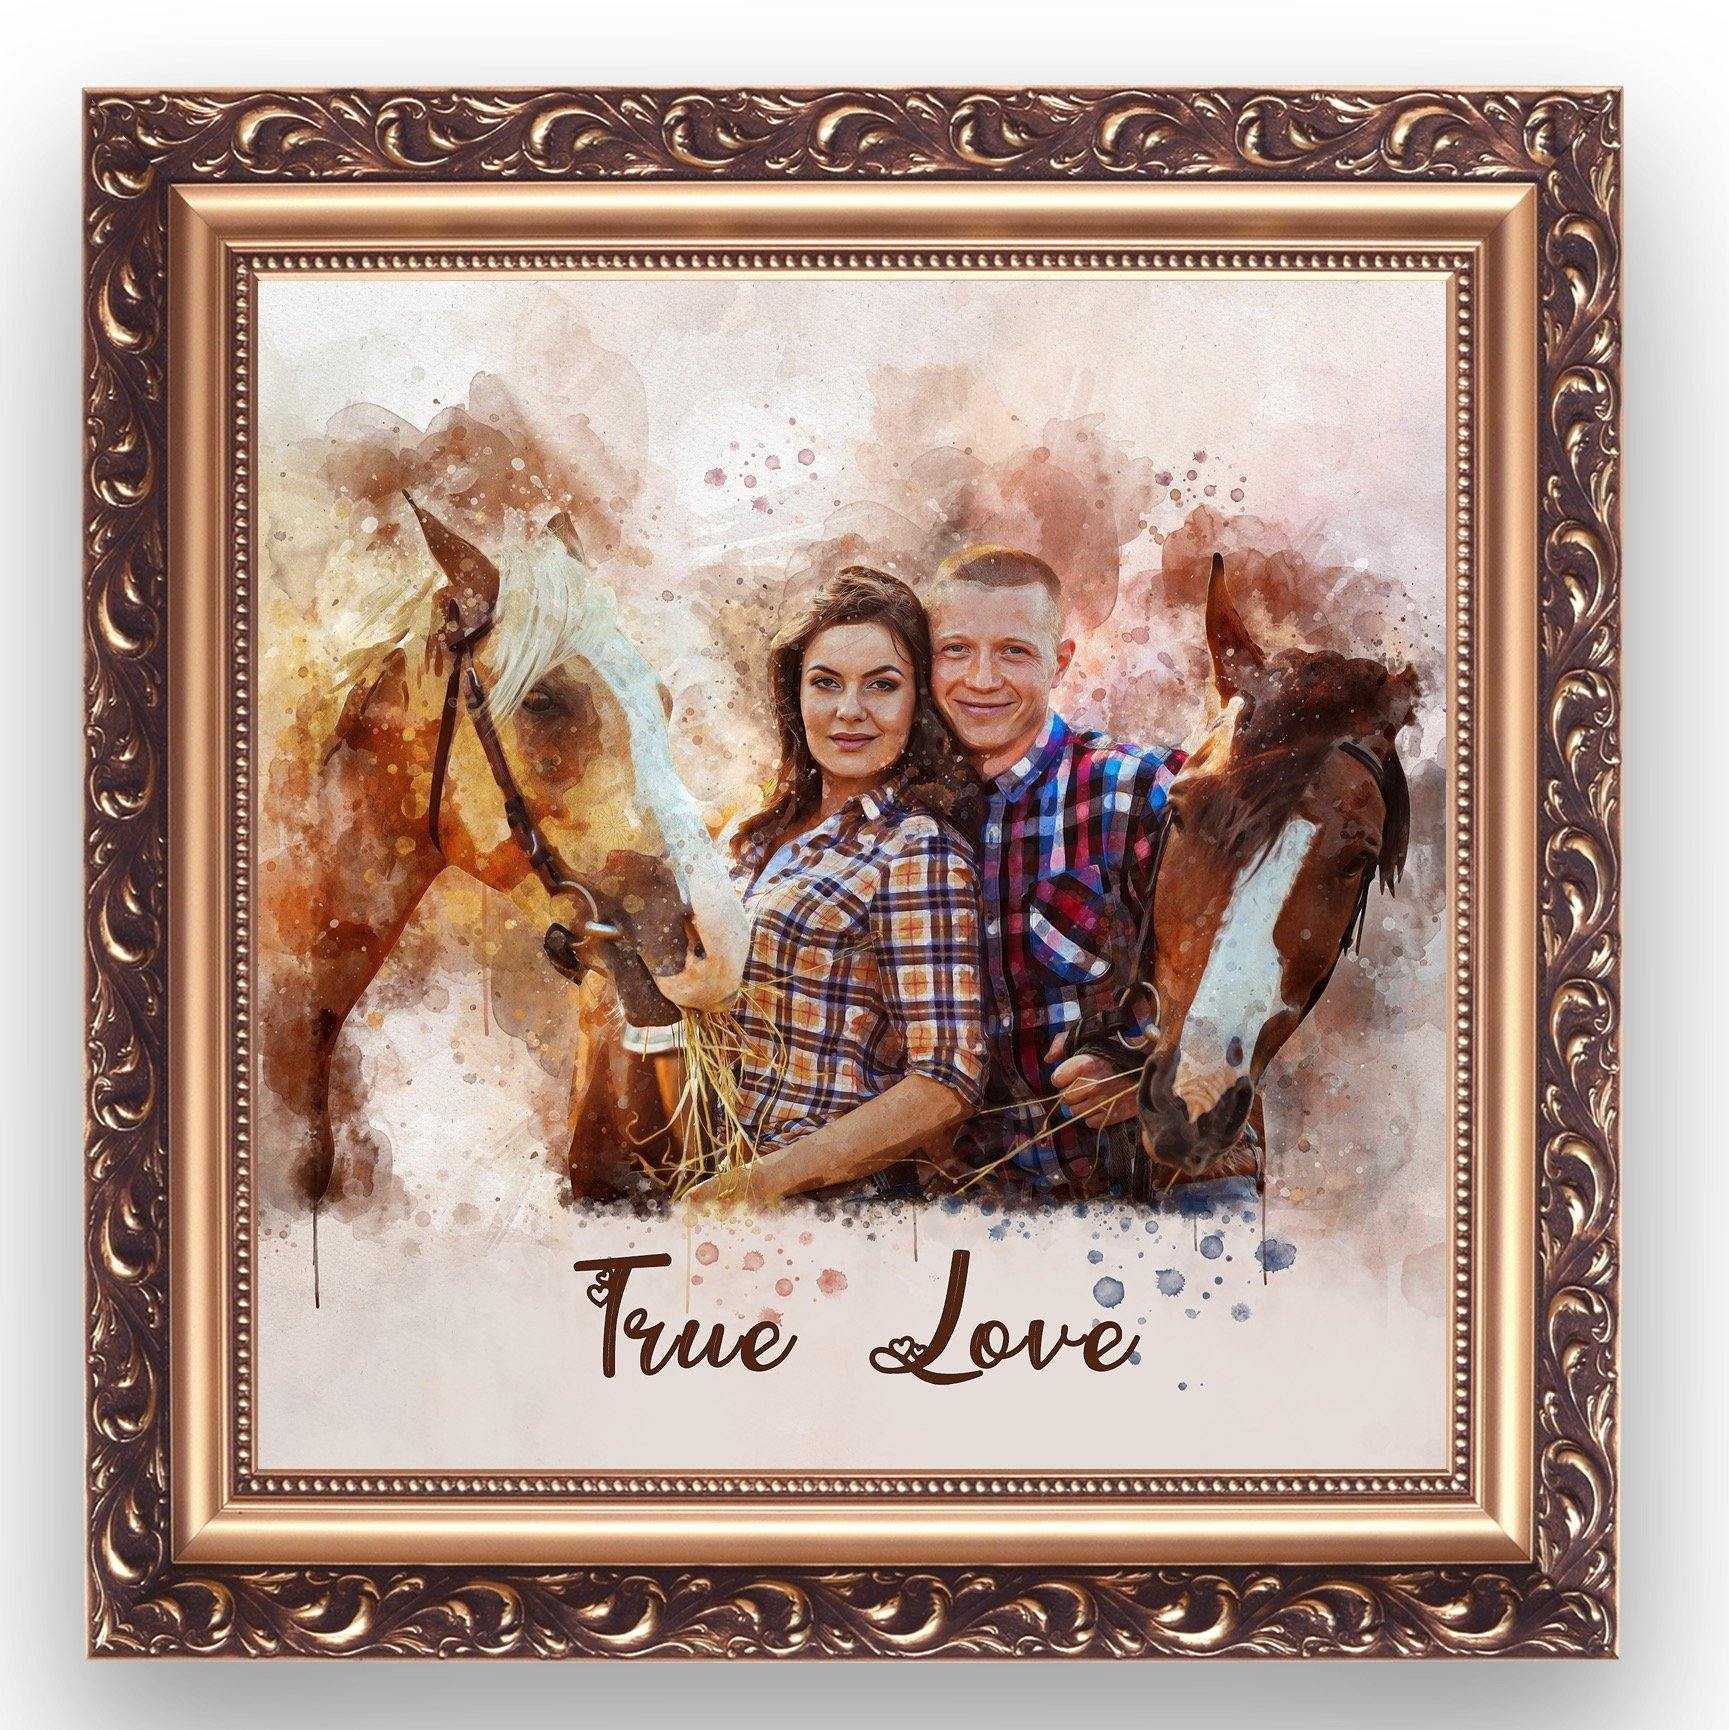 Custom Gift for Horse Lovers | Personalized Painted Horse Portrait on Canvas | From Photo to Painting - FromPicToArt